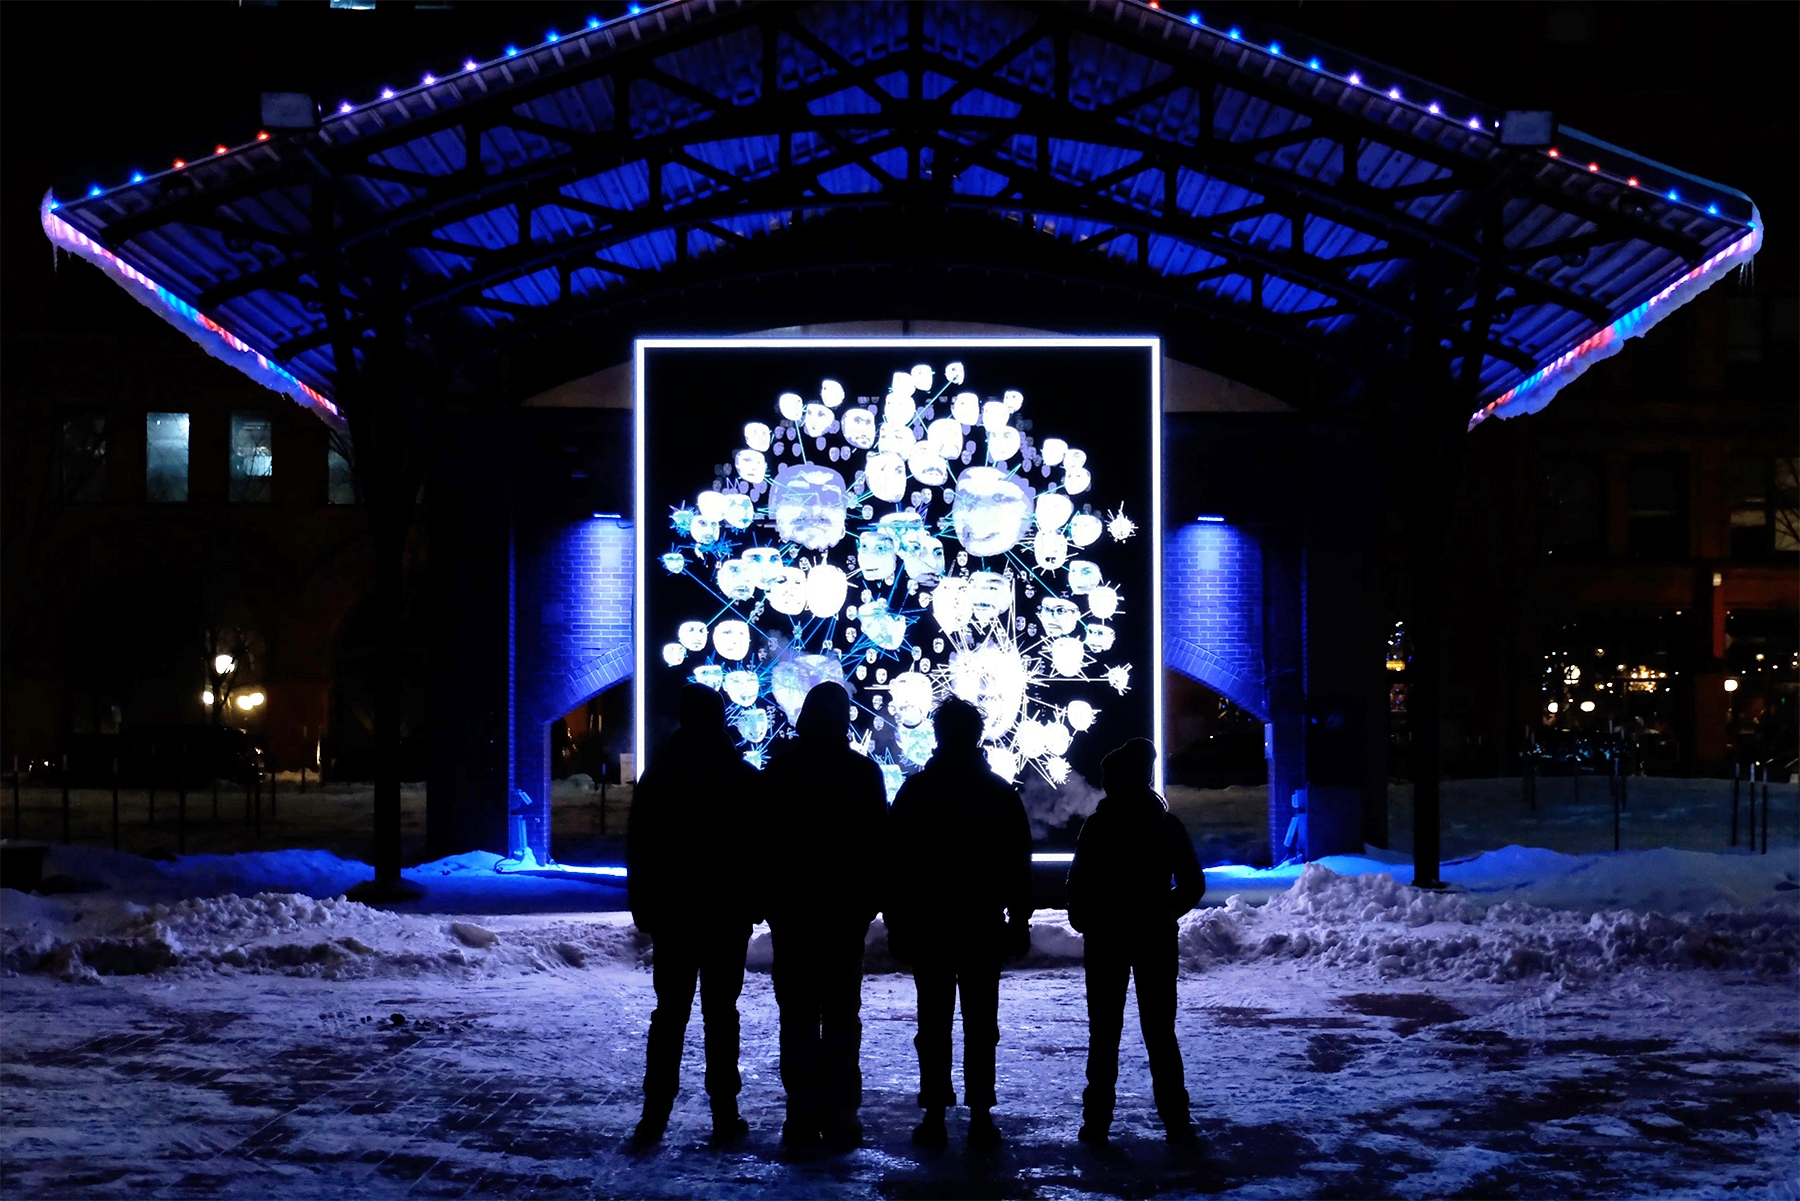 PEOPLE IN SNOW STARING UP AT INTERACTIVE DIGITAL SCREEN INSTALLATION OF FACES IN IREGULAR’S OUR COMMON HOME